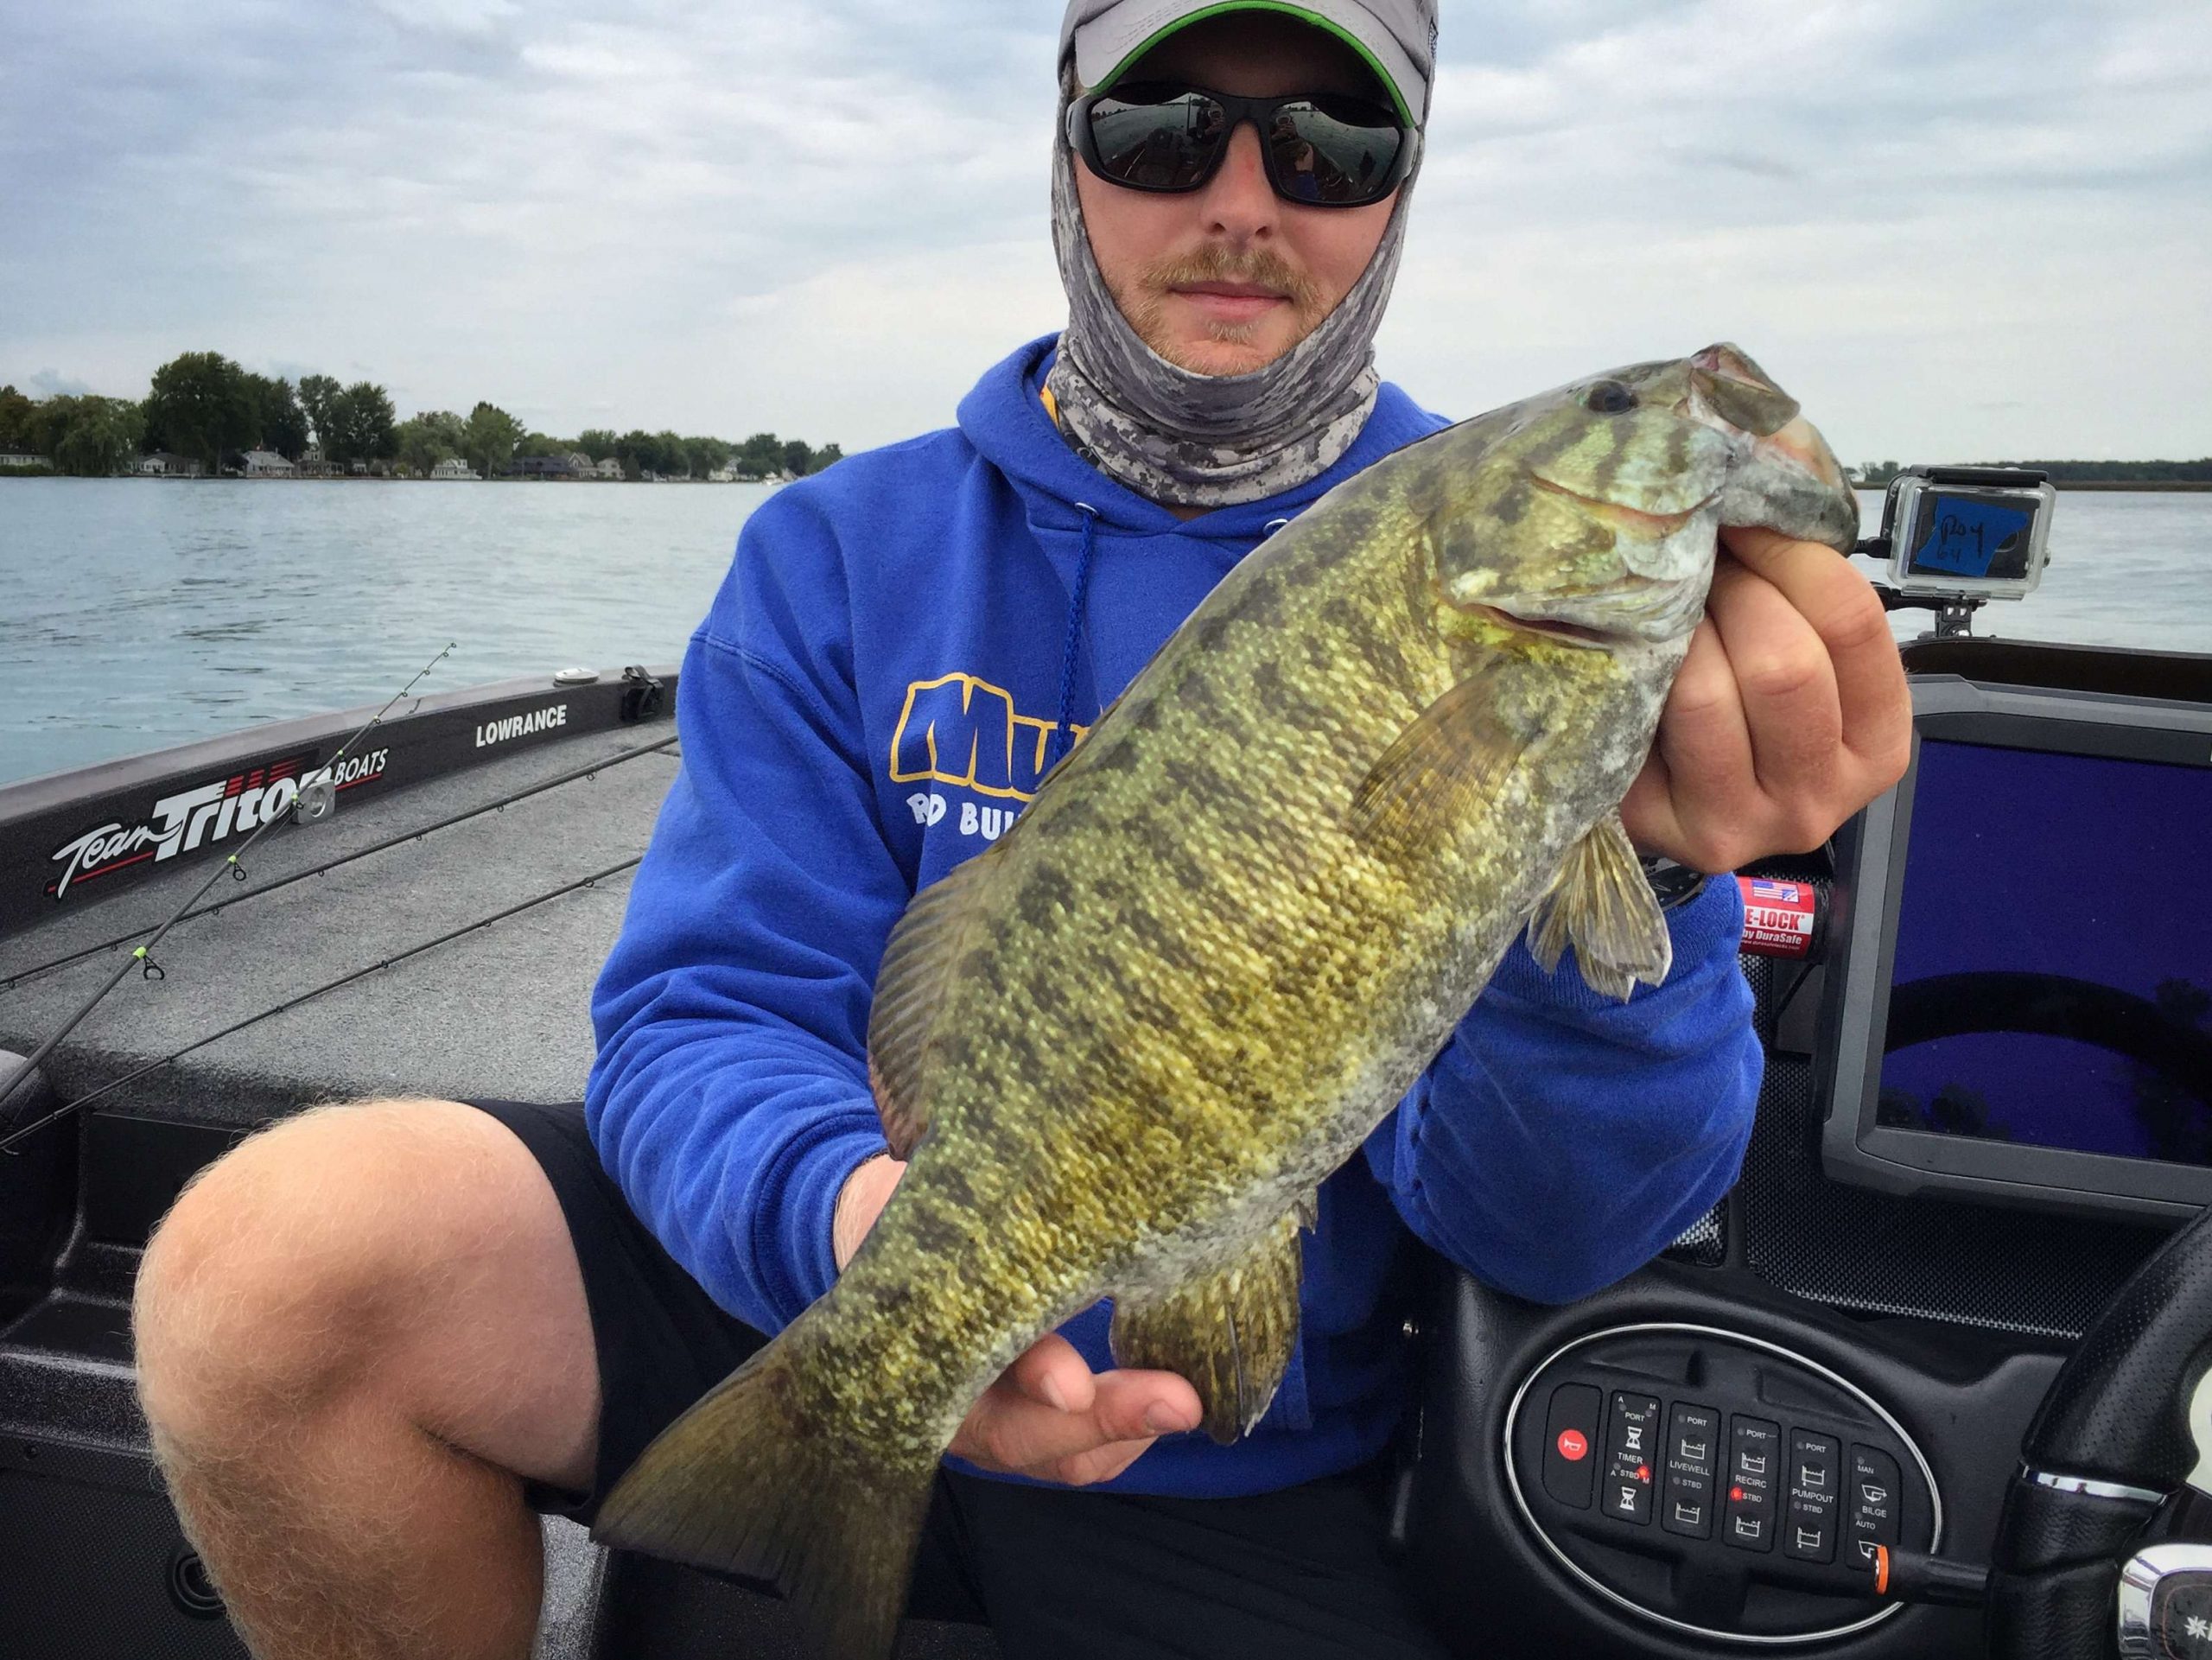 Bradley Roy had to horse this one in to save its life from a giant Muskie!